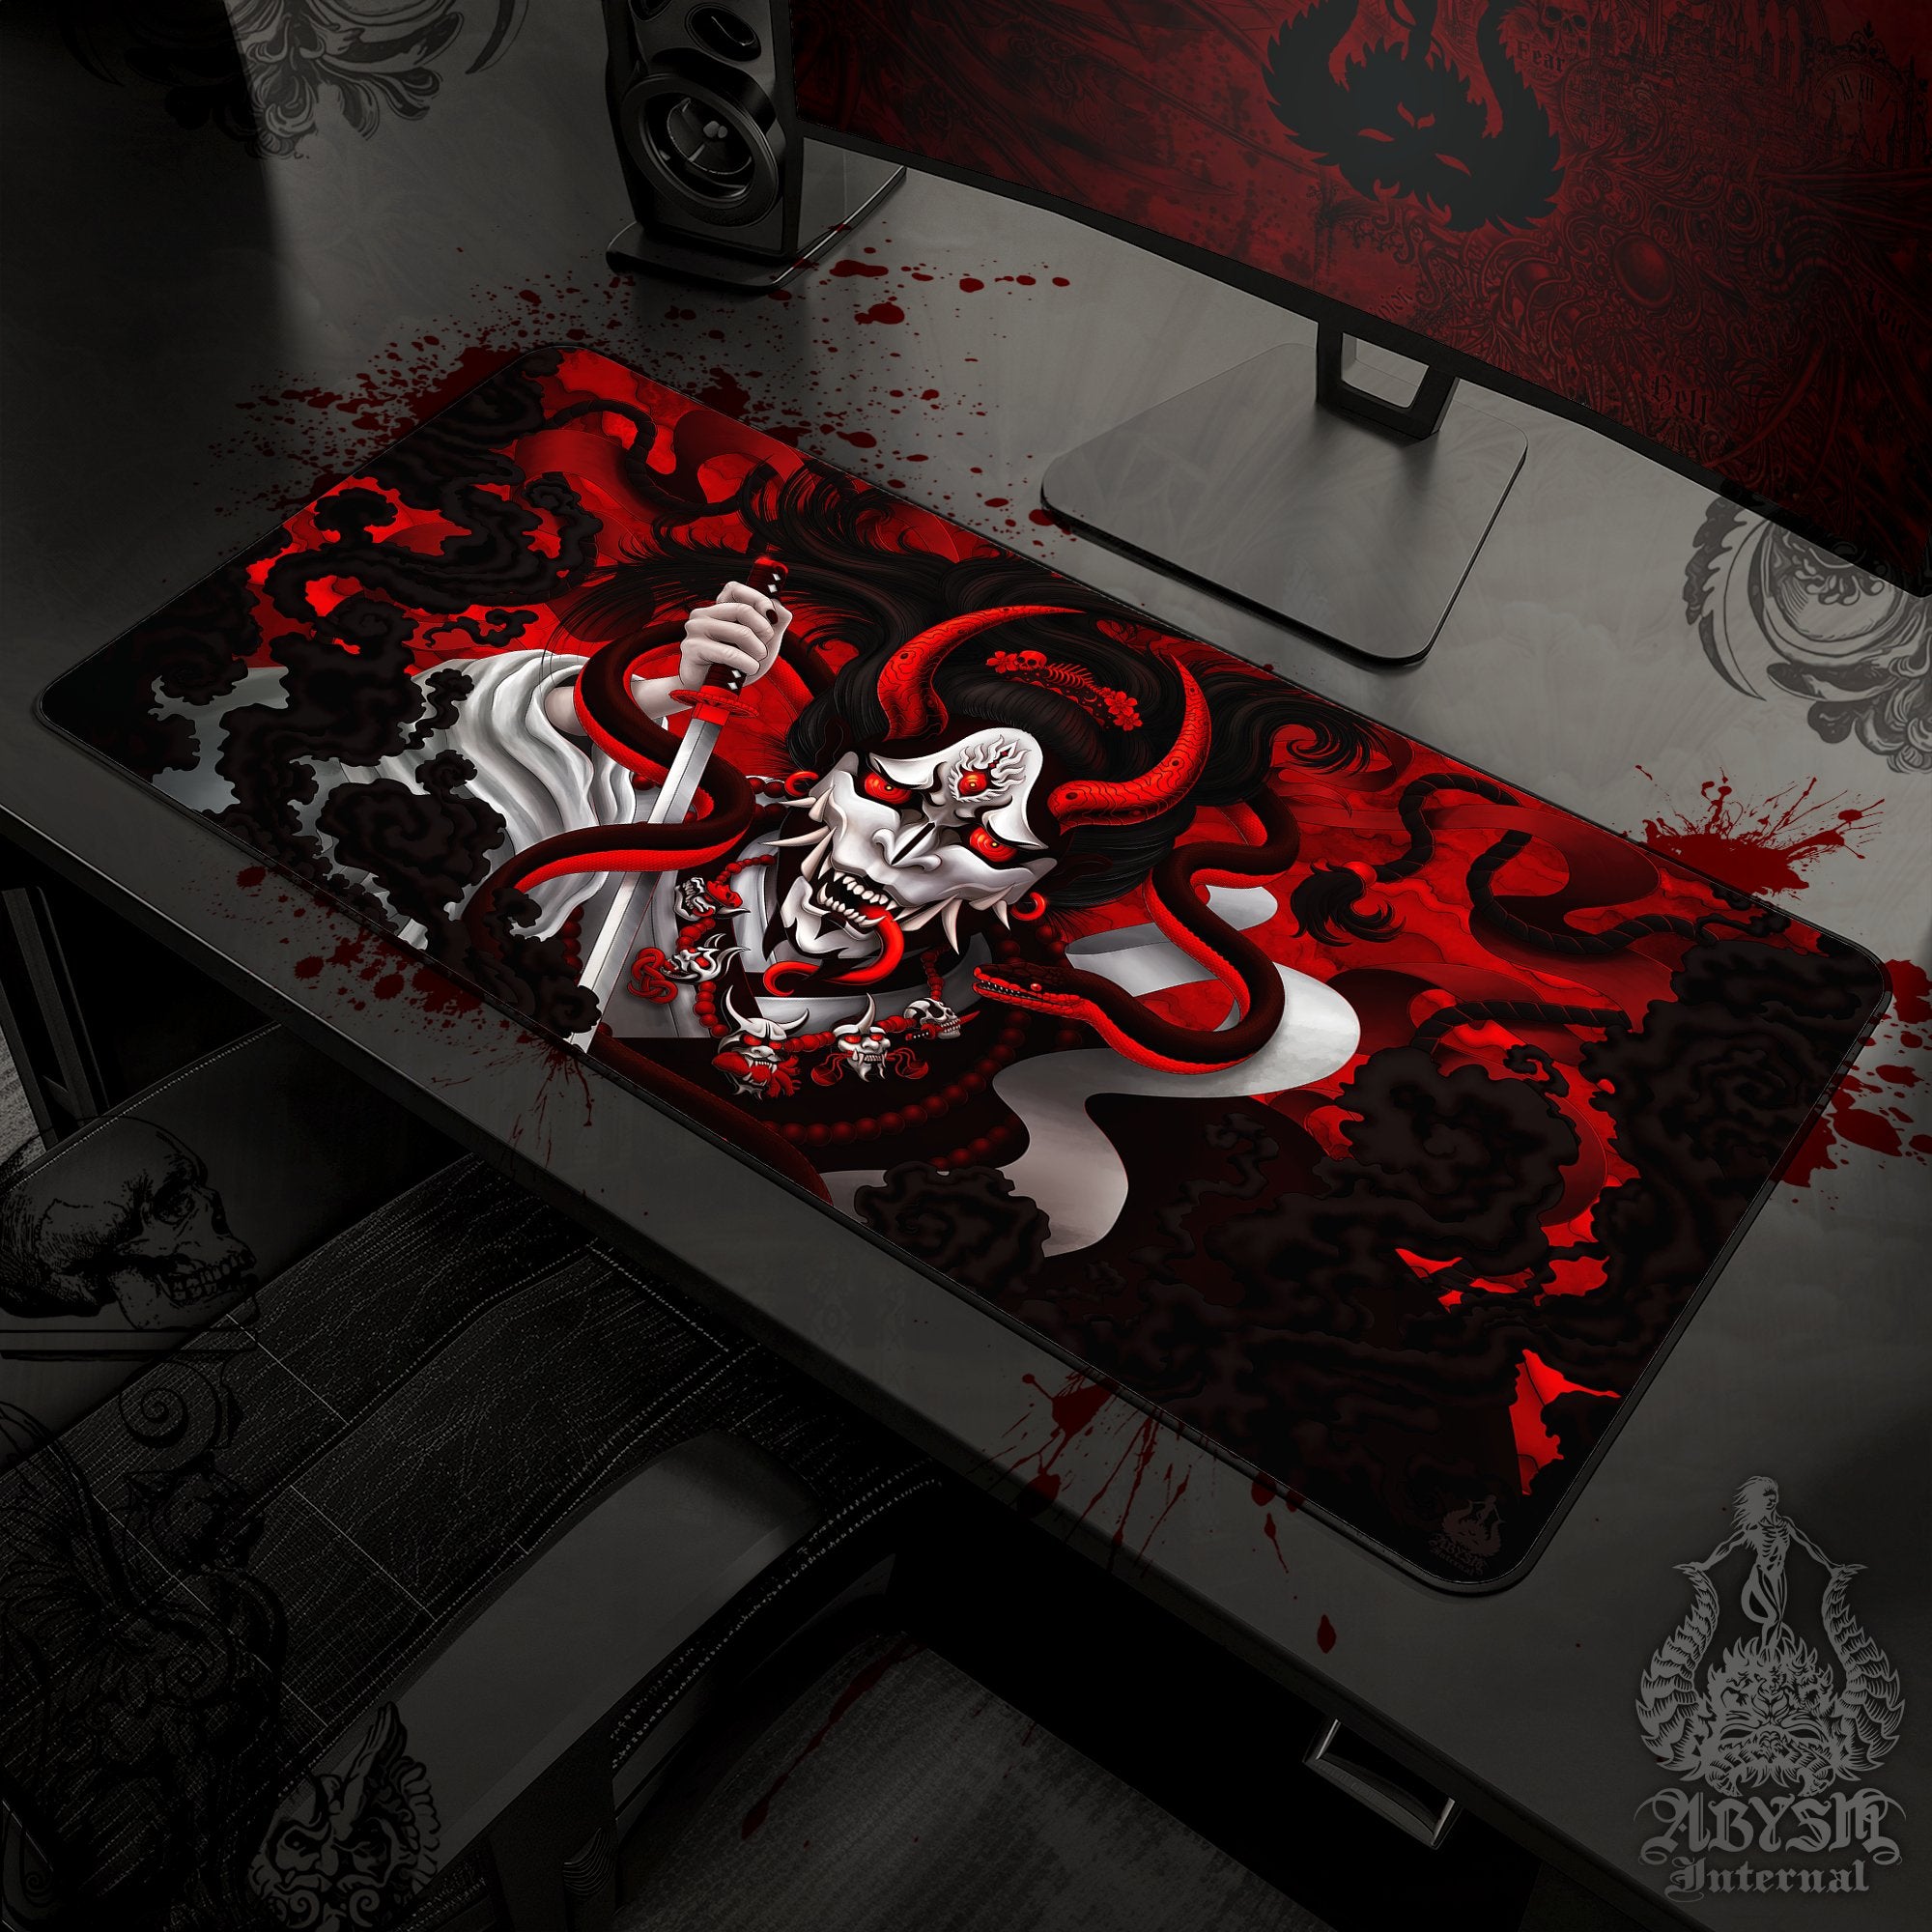 Japanese Demon Gaming Desk Mat, Hannya Mouse Pad, Youkai Table Protector Cover, Bloody White Goth Workpad, Fantasy Anime and Manga Art Print - Snake - Abysm Internal